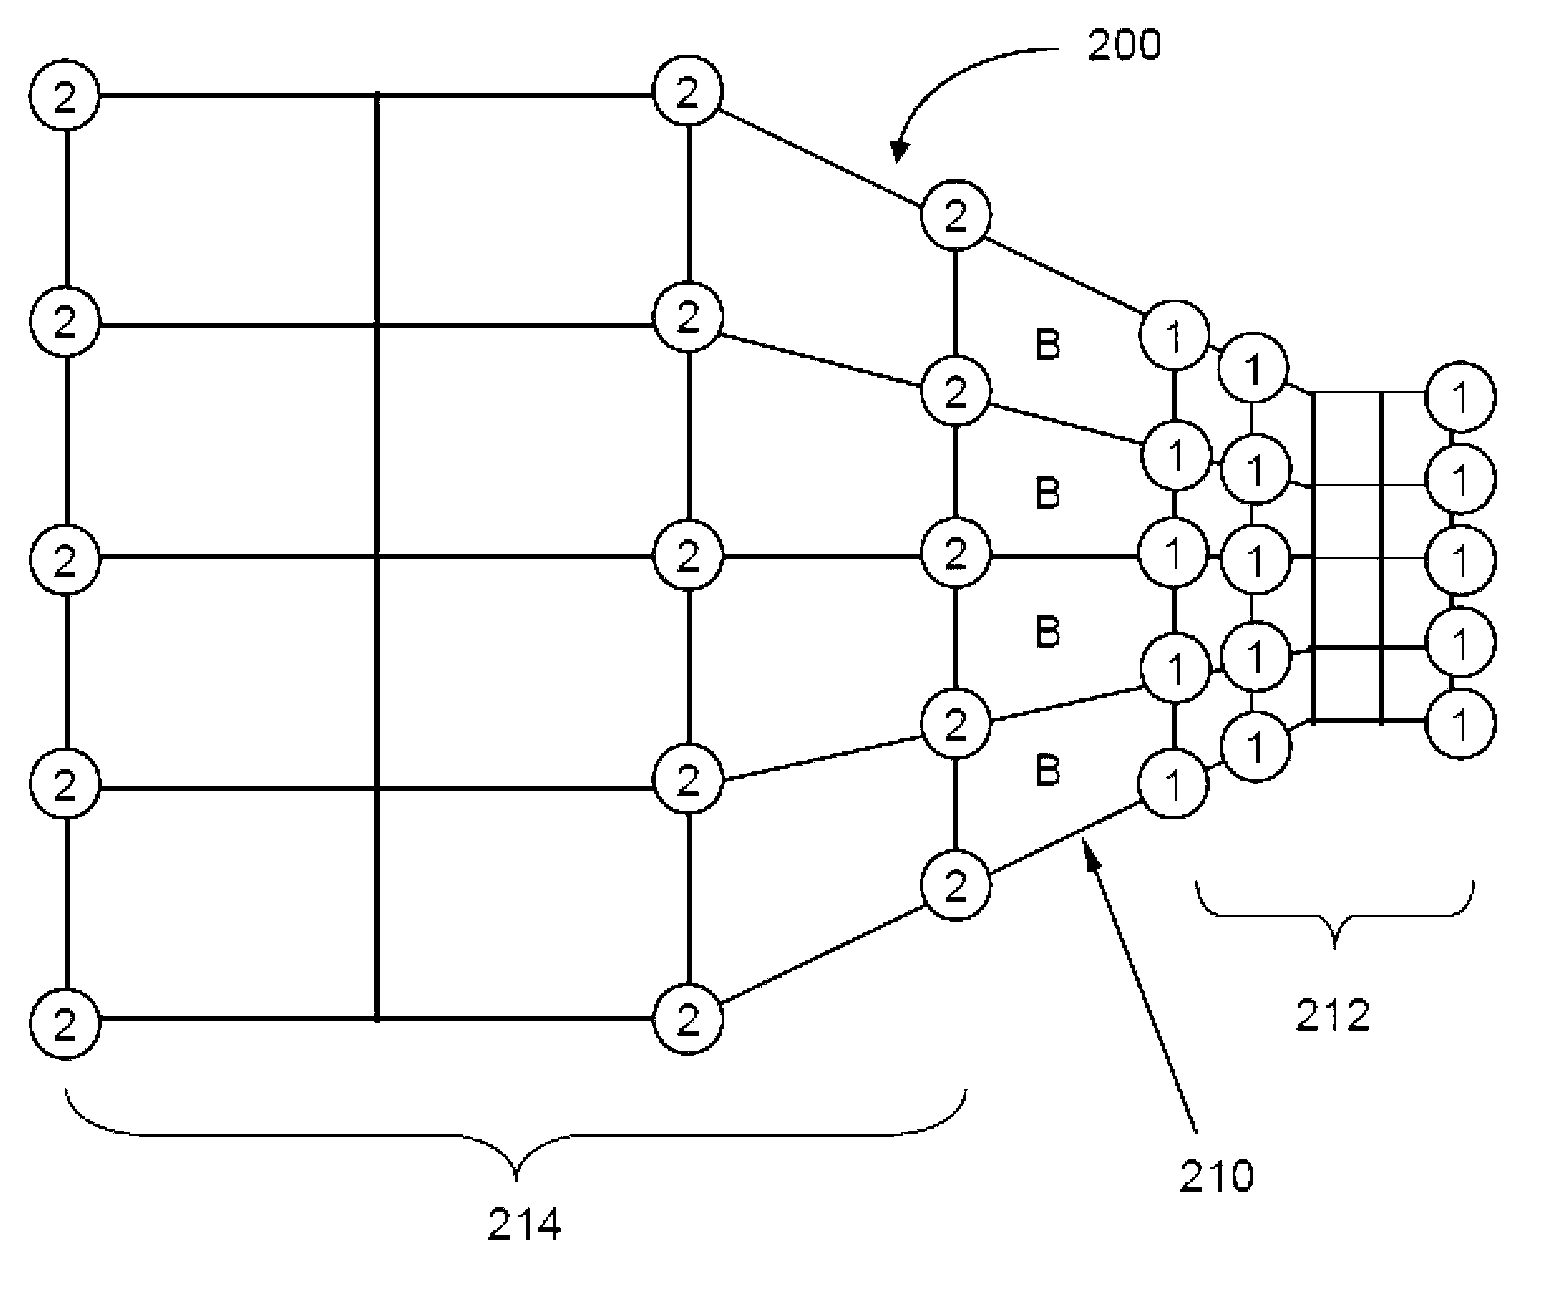 Numerically simulating structural behaviors of a product by using explicit finite element analysis with a mass scaling enhanced subcycling technique